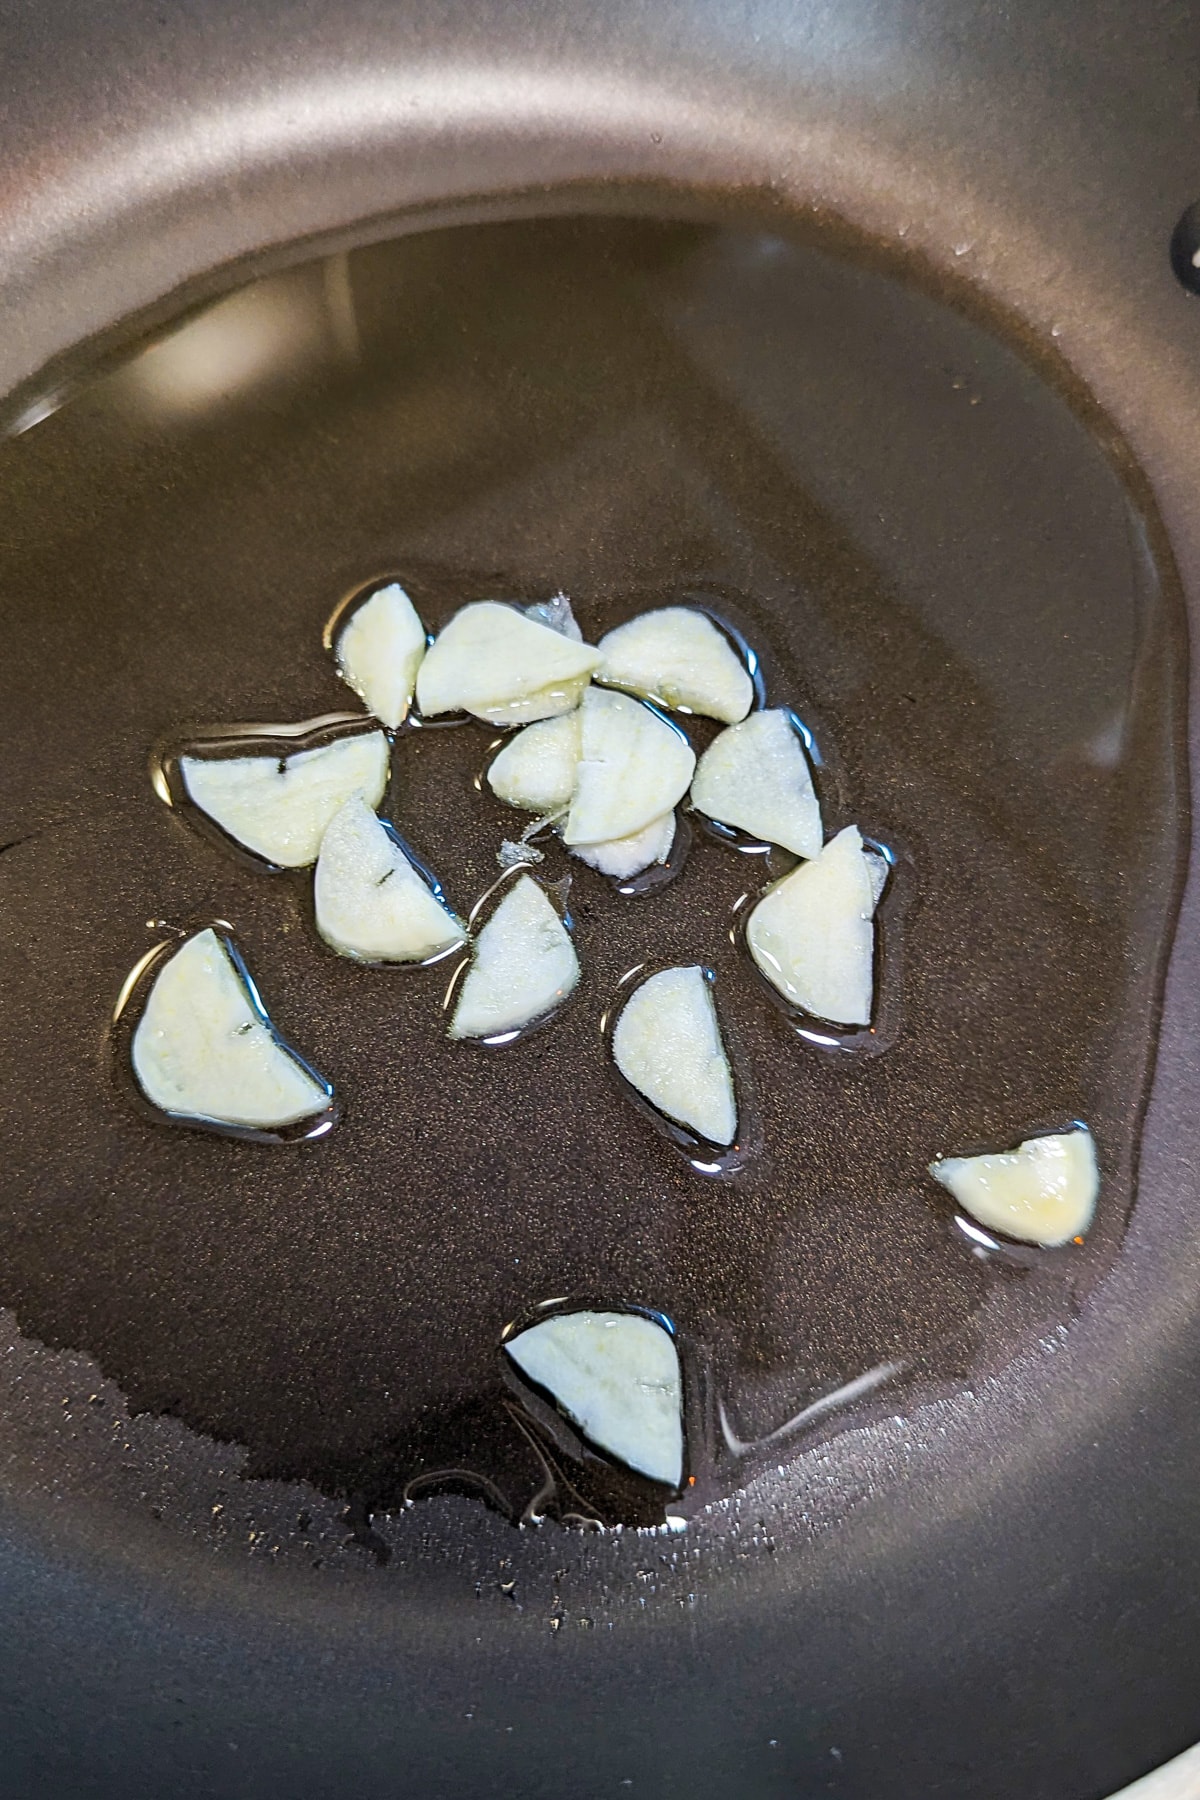 Frying garlic in melted butter on the stove in a pan.